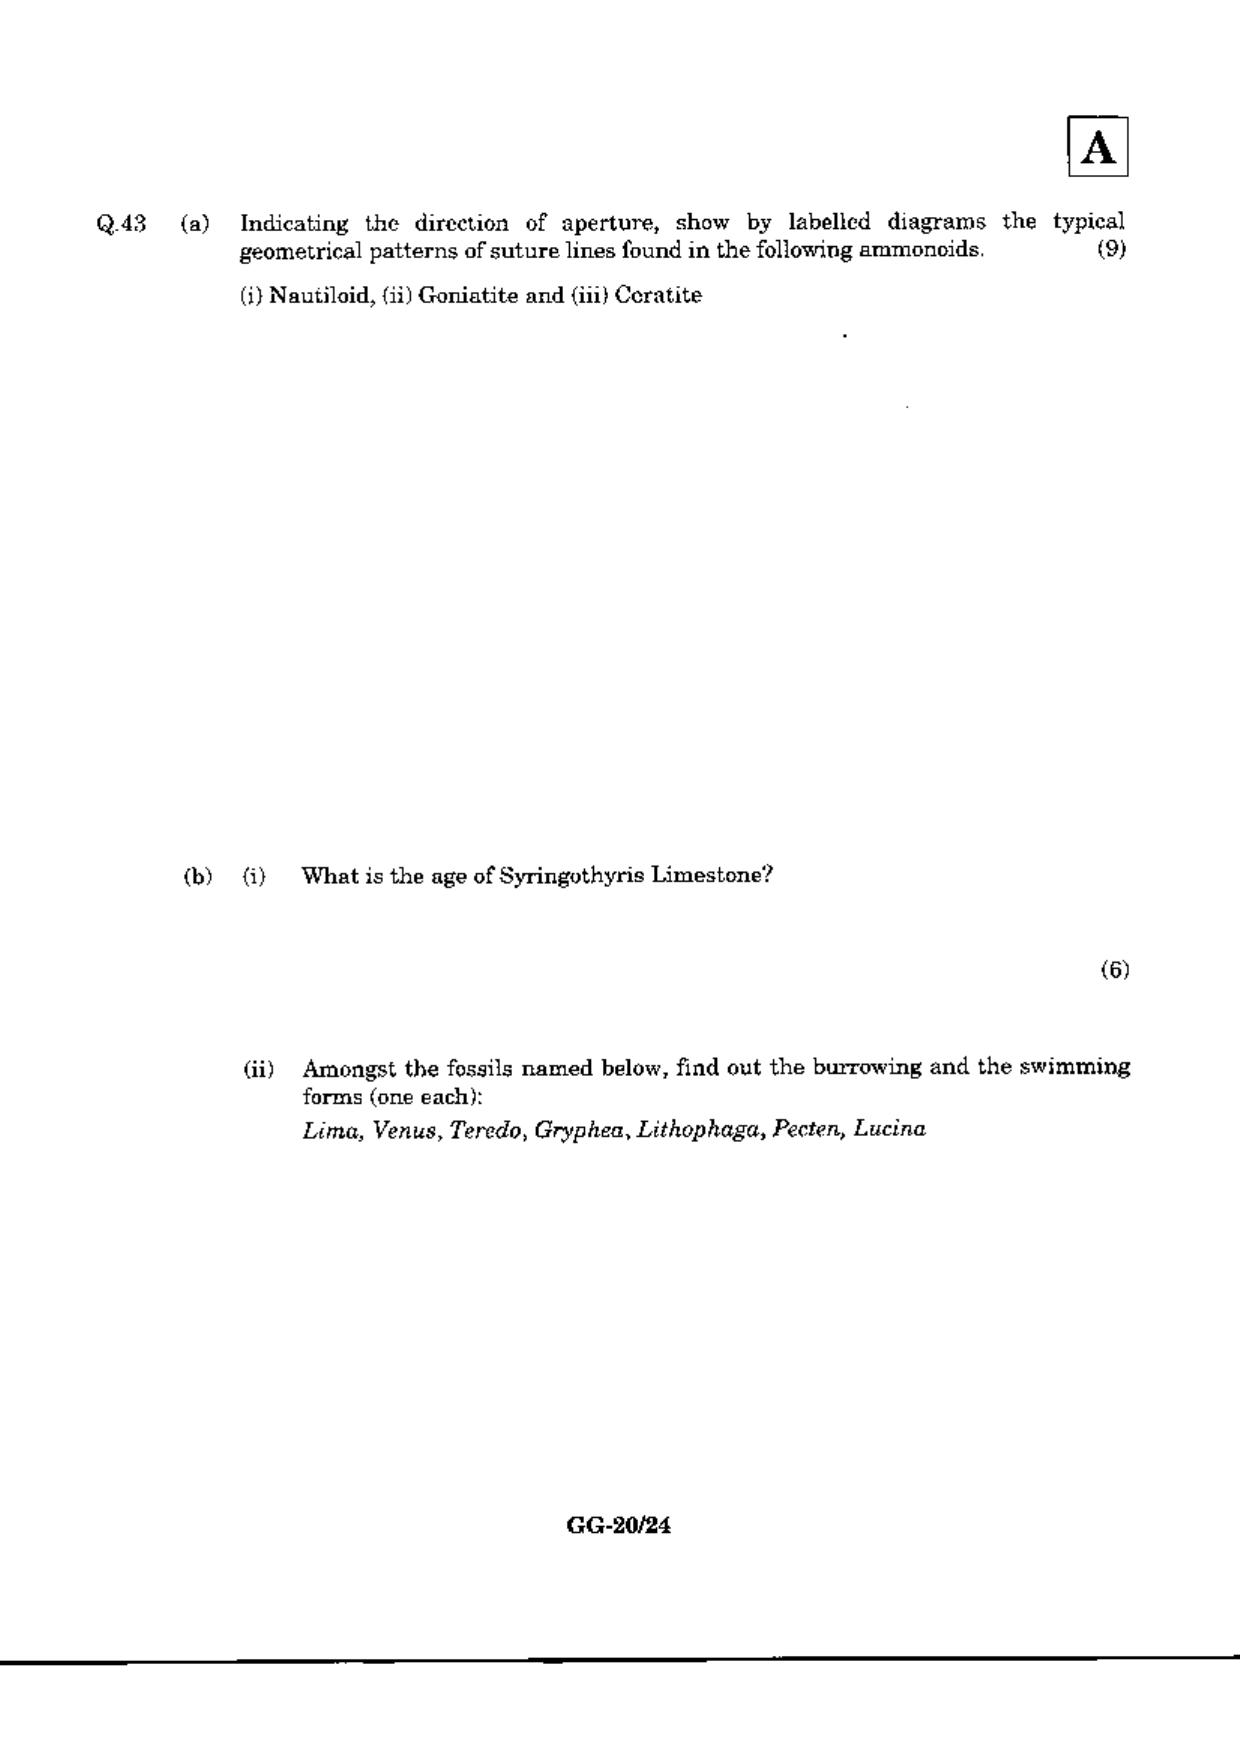 JAM 2010: GG Question Paper - Page 22